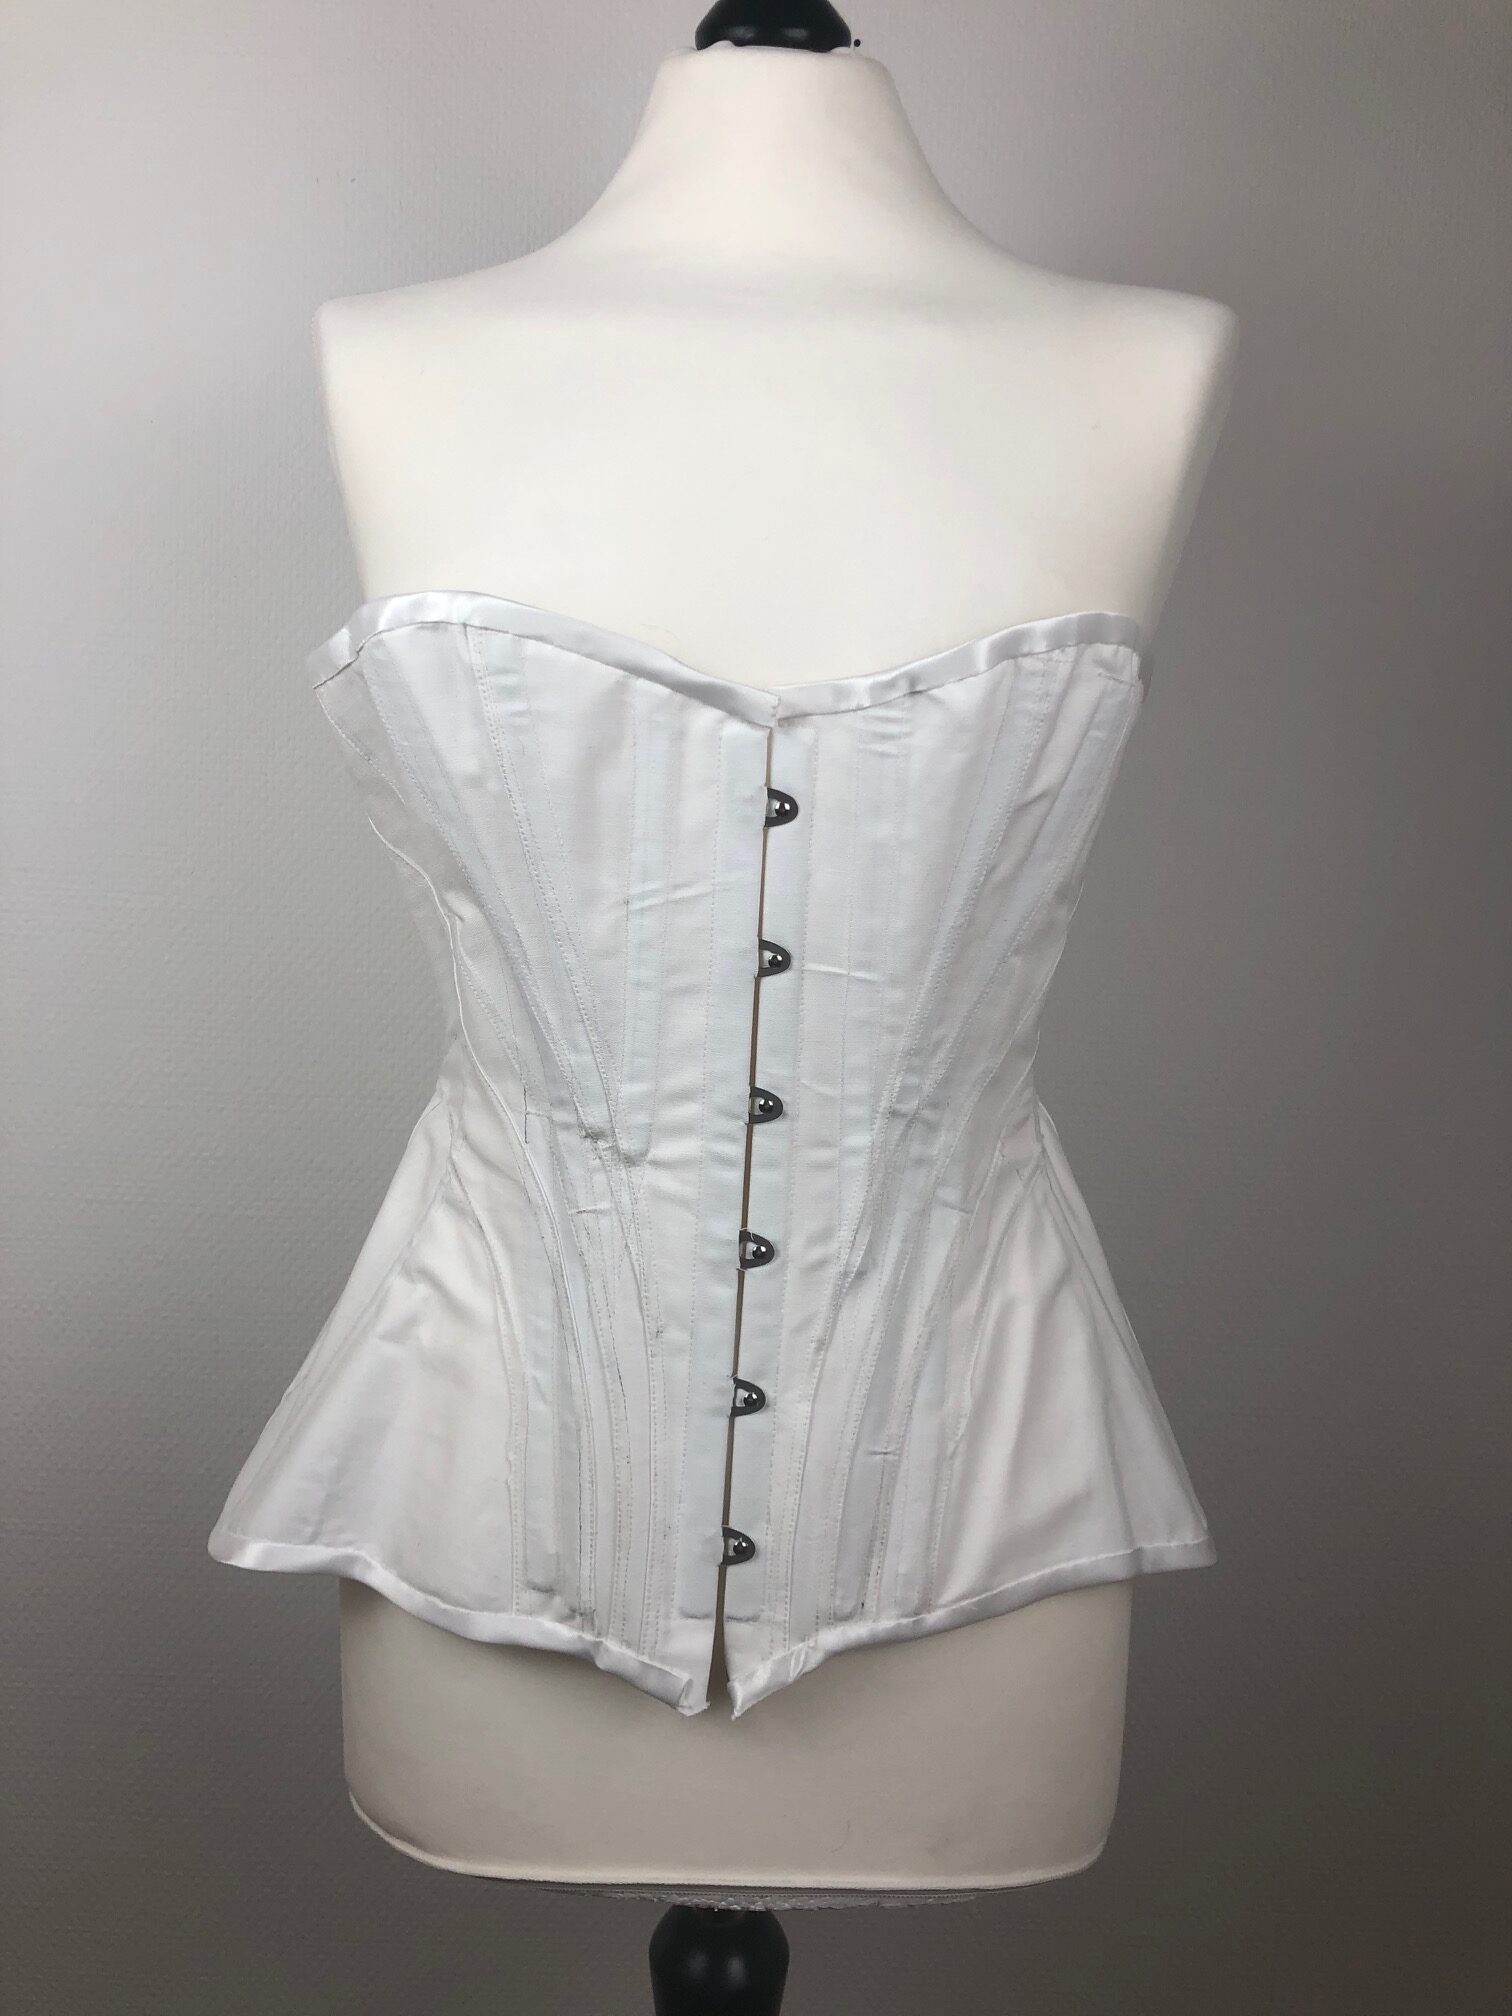 Creating Corsetry: How to draft and sew a corset